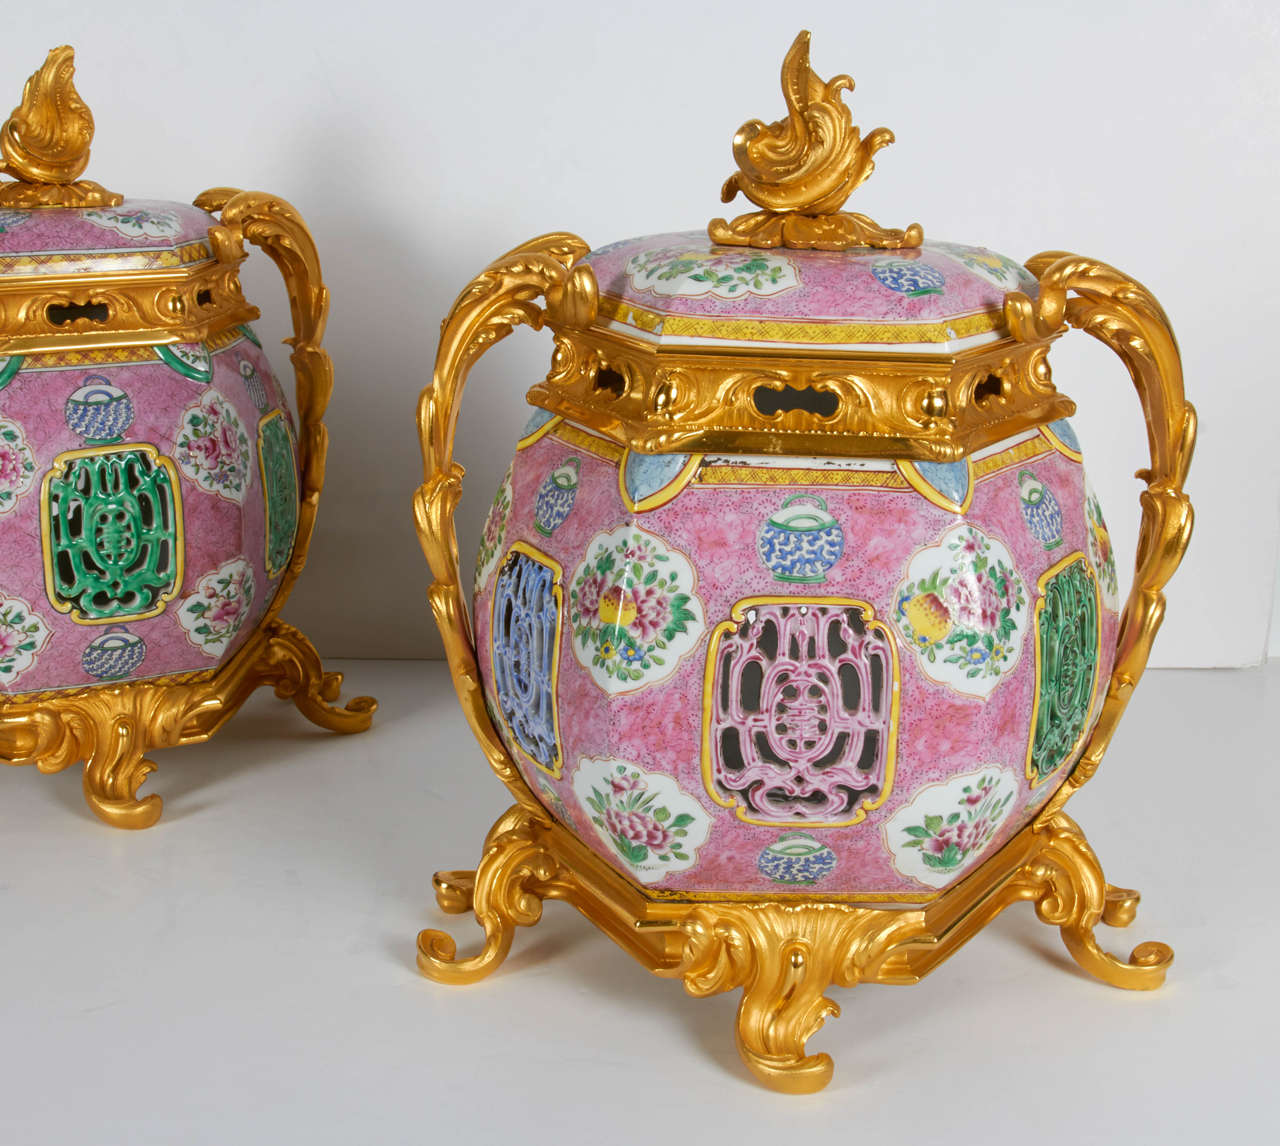 A very fine pair of antique Chinese porcelain and Louis XV-Louis XVI transitional, French doré bronze mounted covered potpourri/urns. These beautiful and quite decorative covered vases are truly spectacular in person and pretty large in scale. The